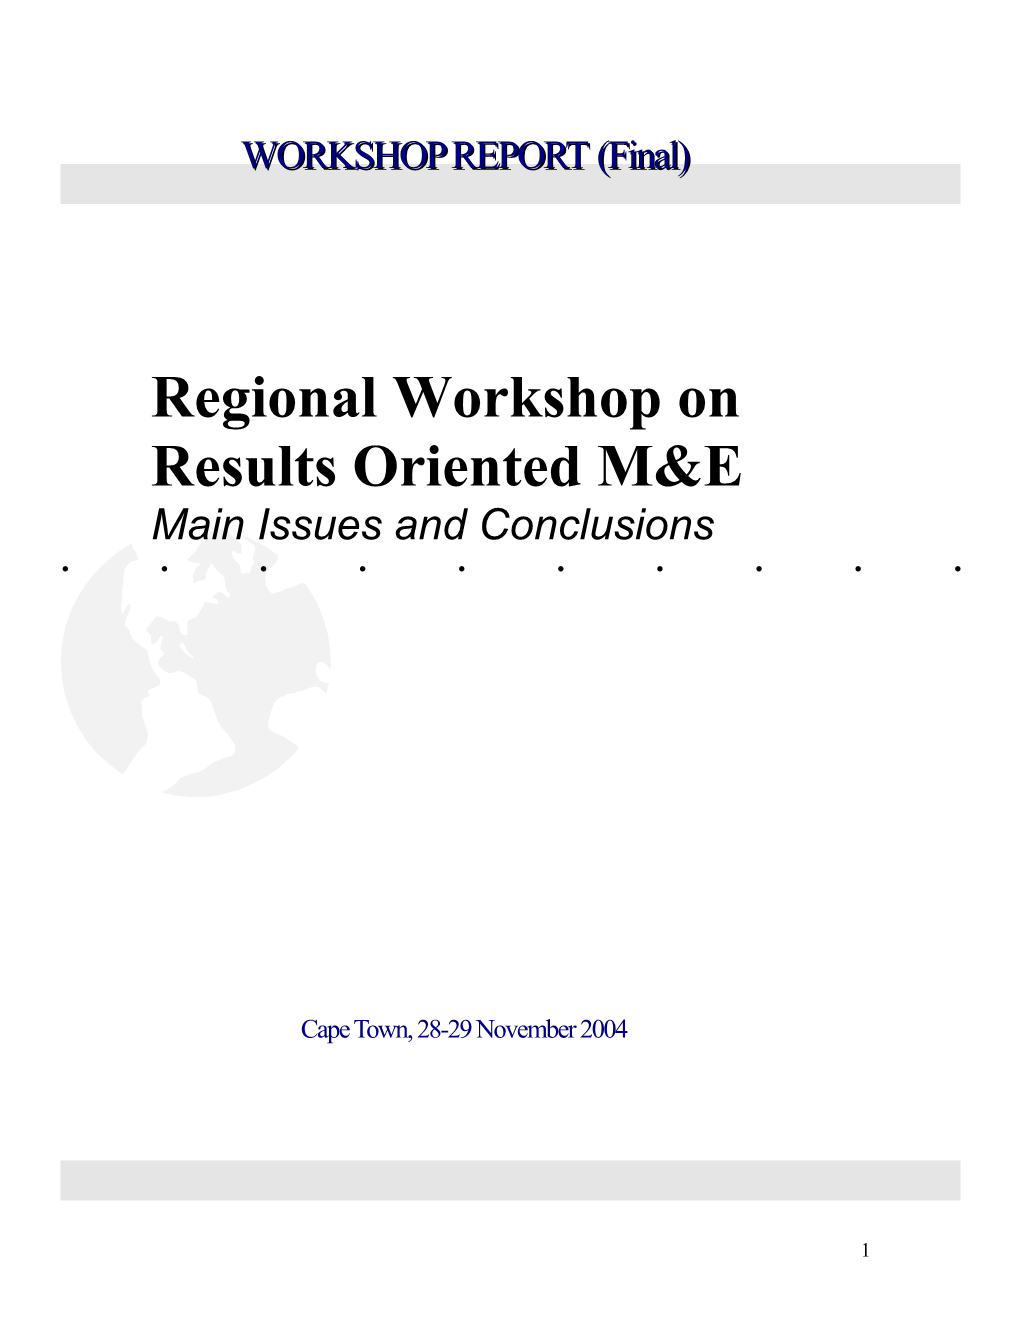 Regional Workshop on Results Oriented M&E